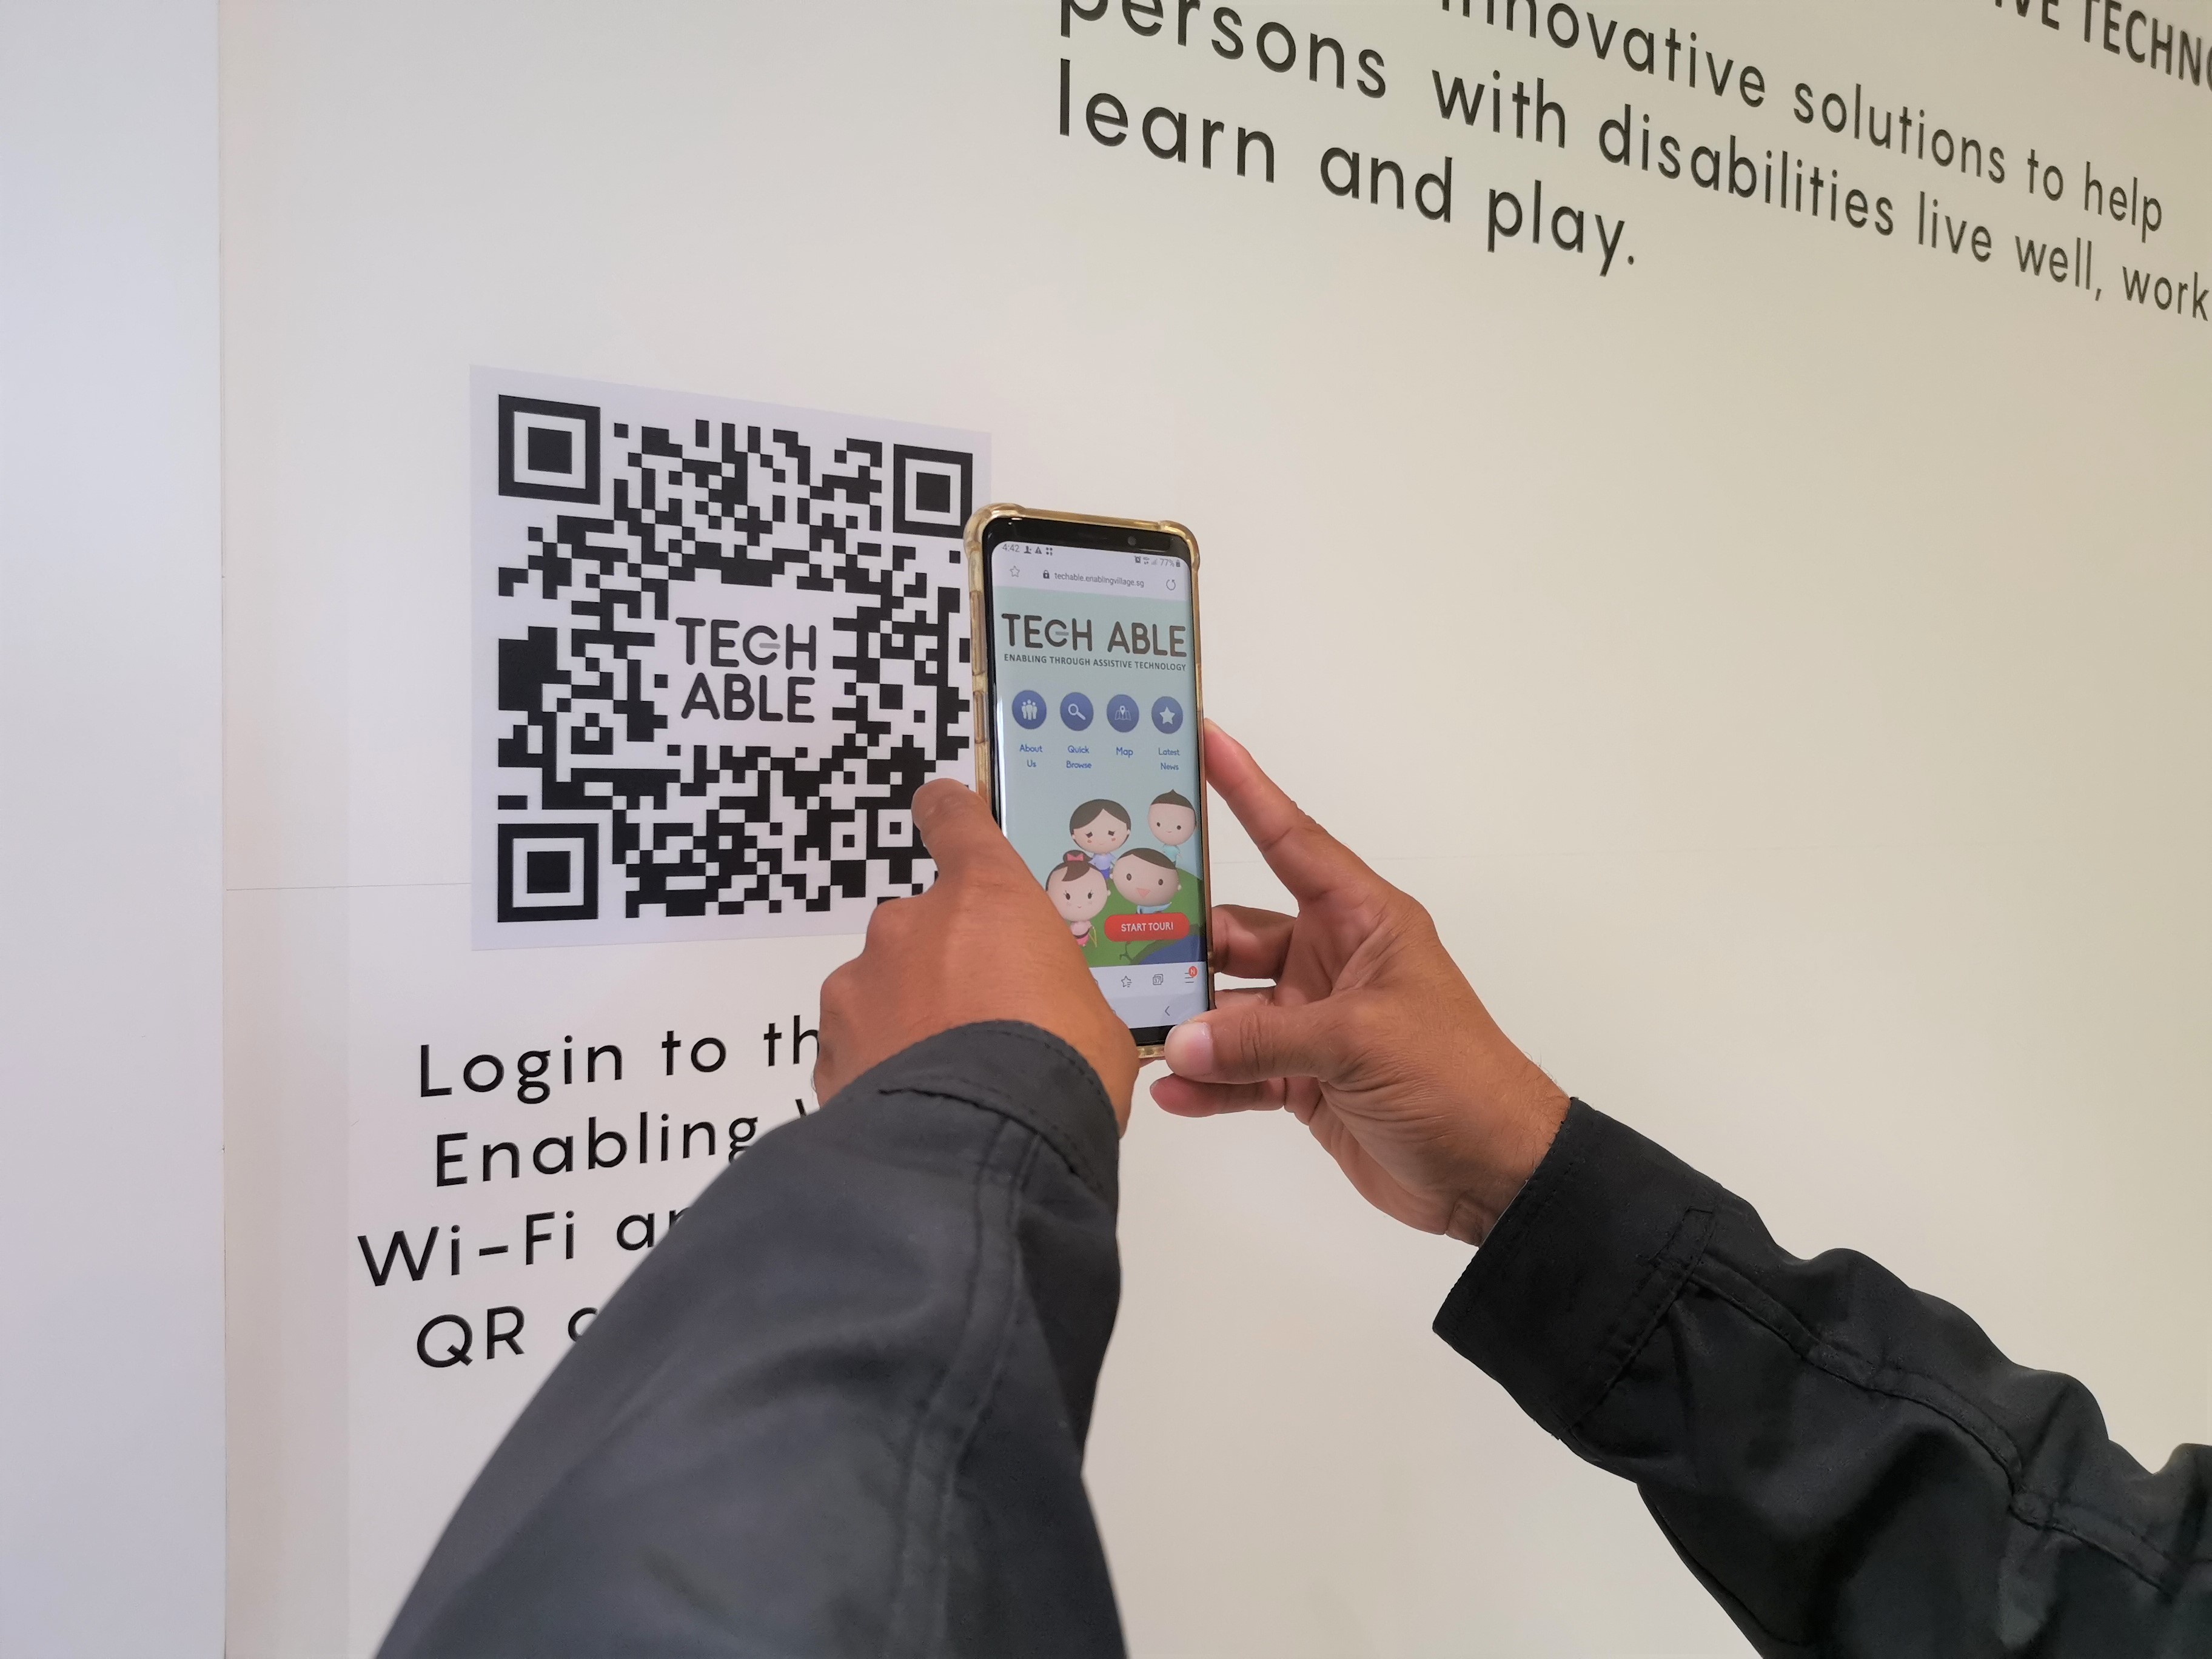 A visitor scans the QR code on the wall to launch the interactive web app which contains information about the assistive technology devices on display.